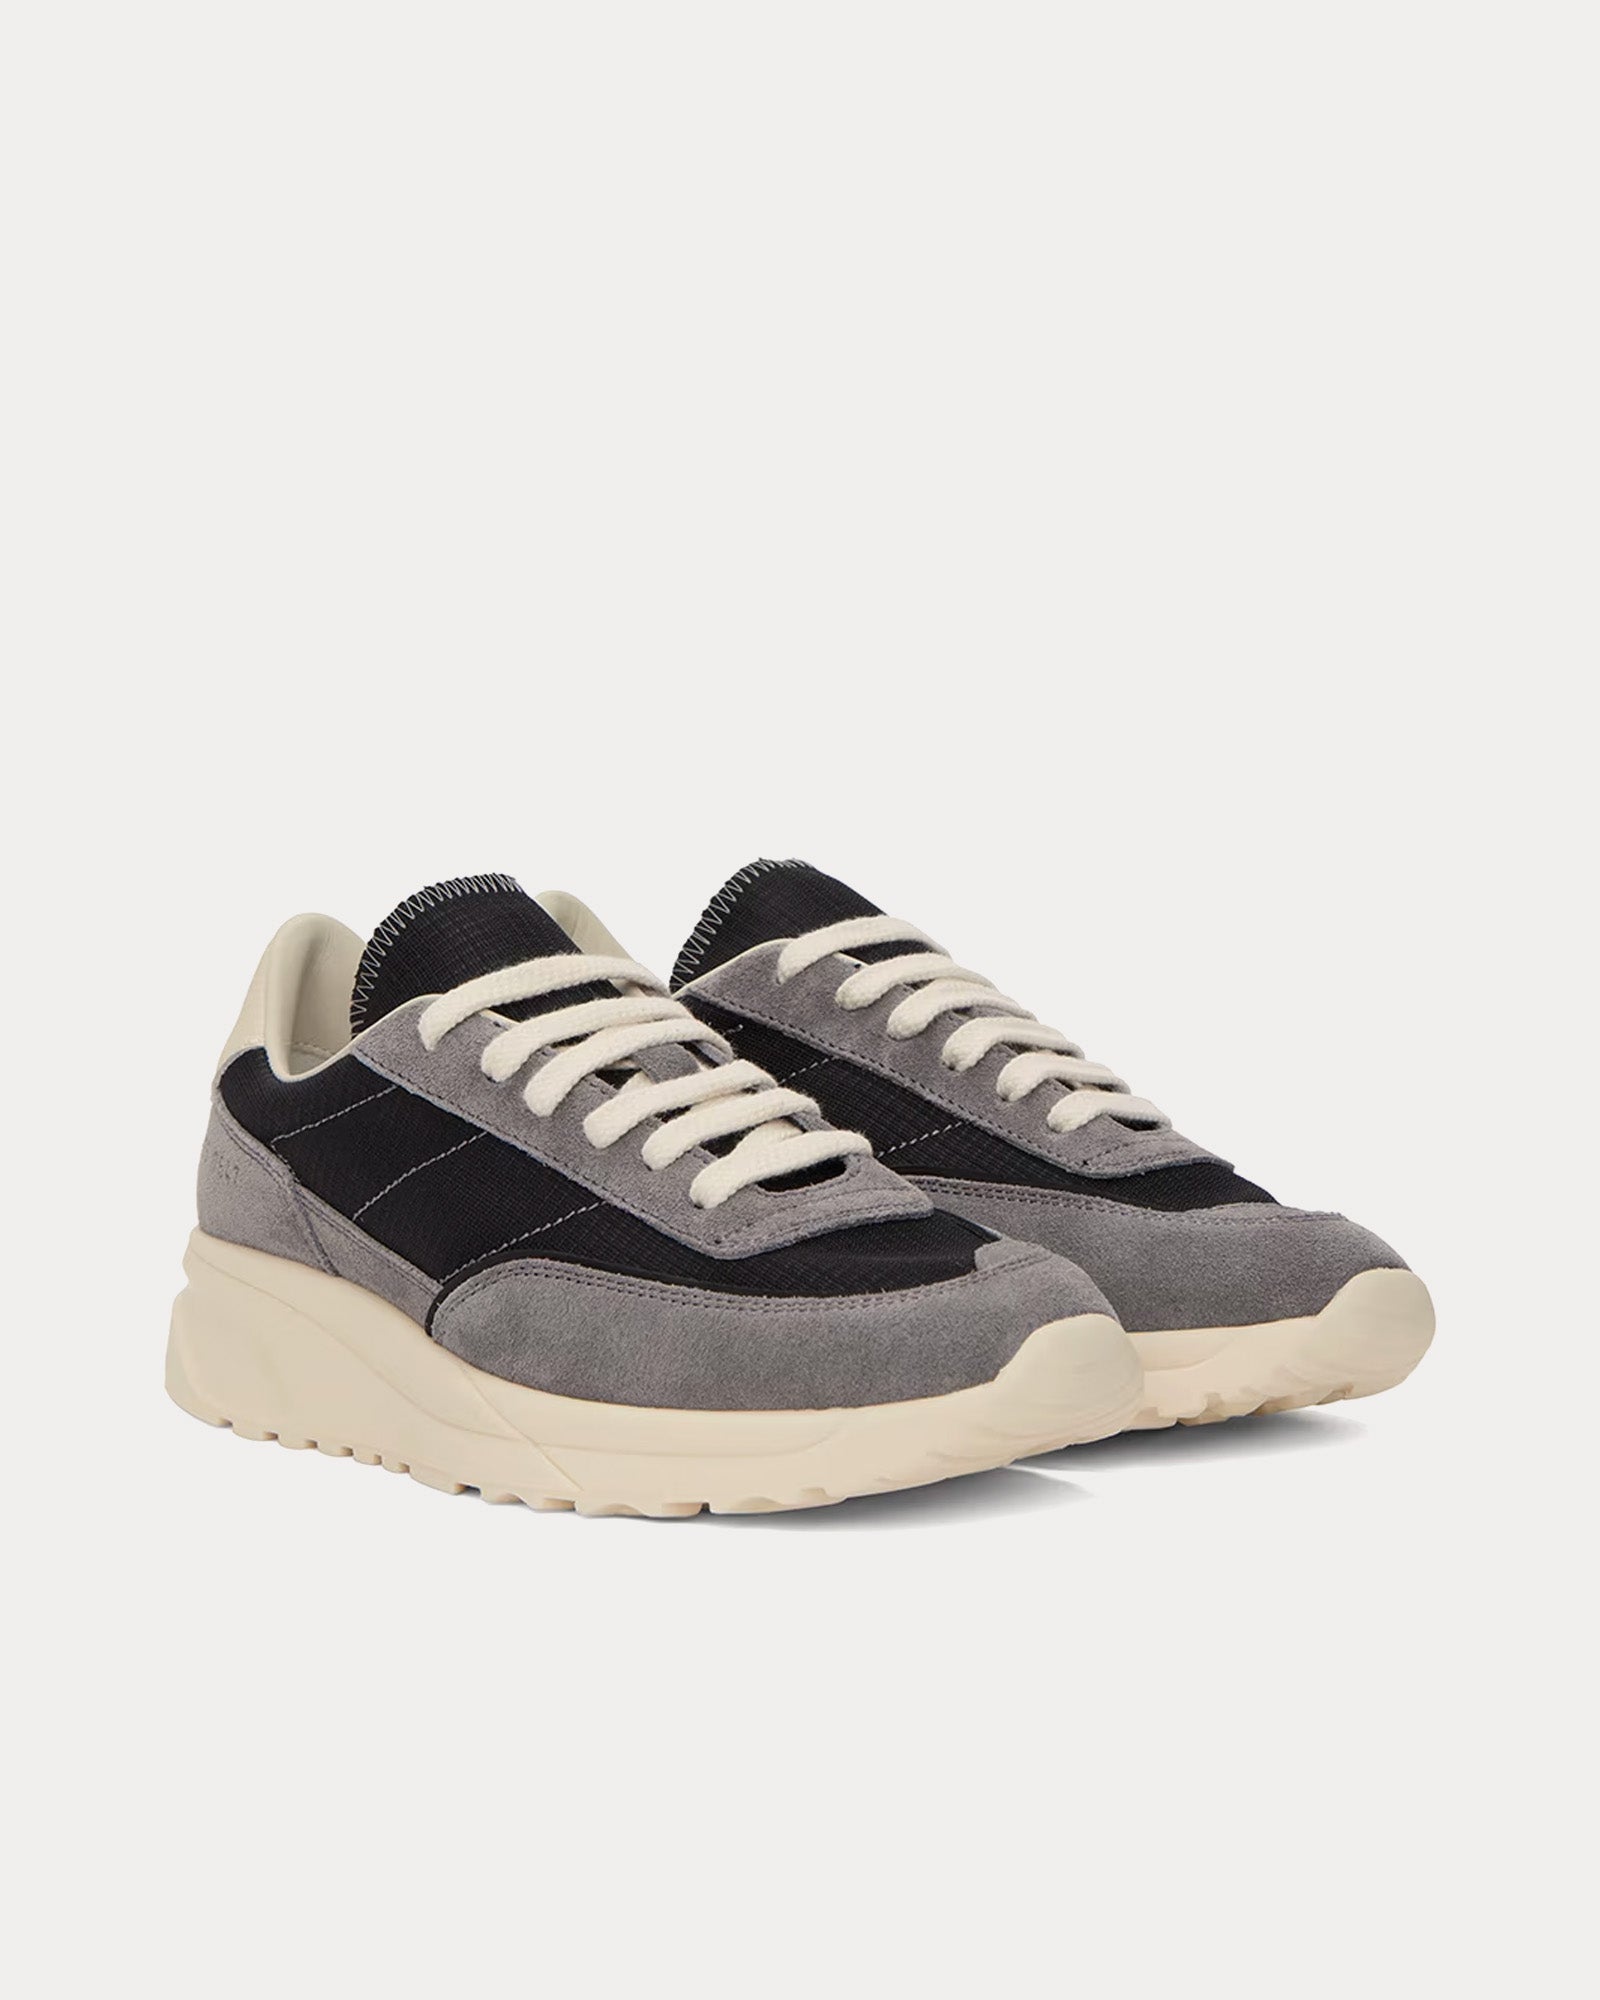 Common Projects - Track 80s Grey / Black Low Top Sneakers